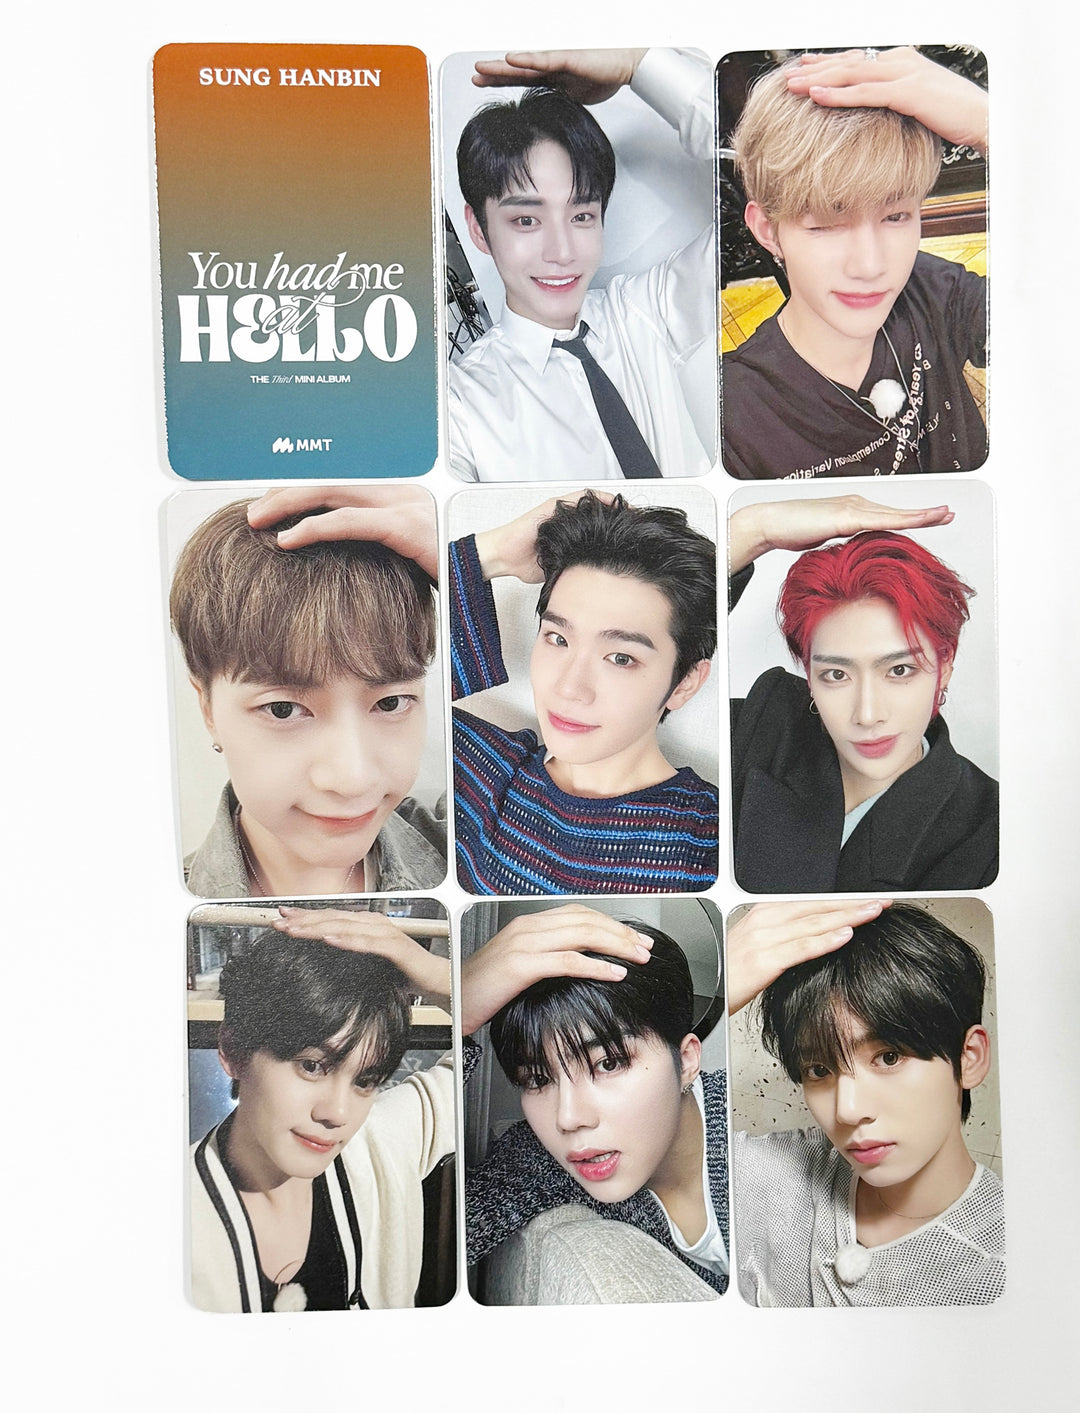 ZEROBASEONE(ZB1) "You had me at HELLO" - MMT Pre-Order Benefit Photocard [24.6.5]